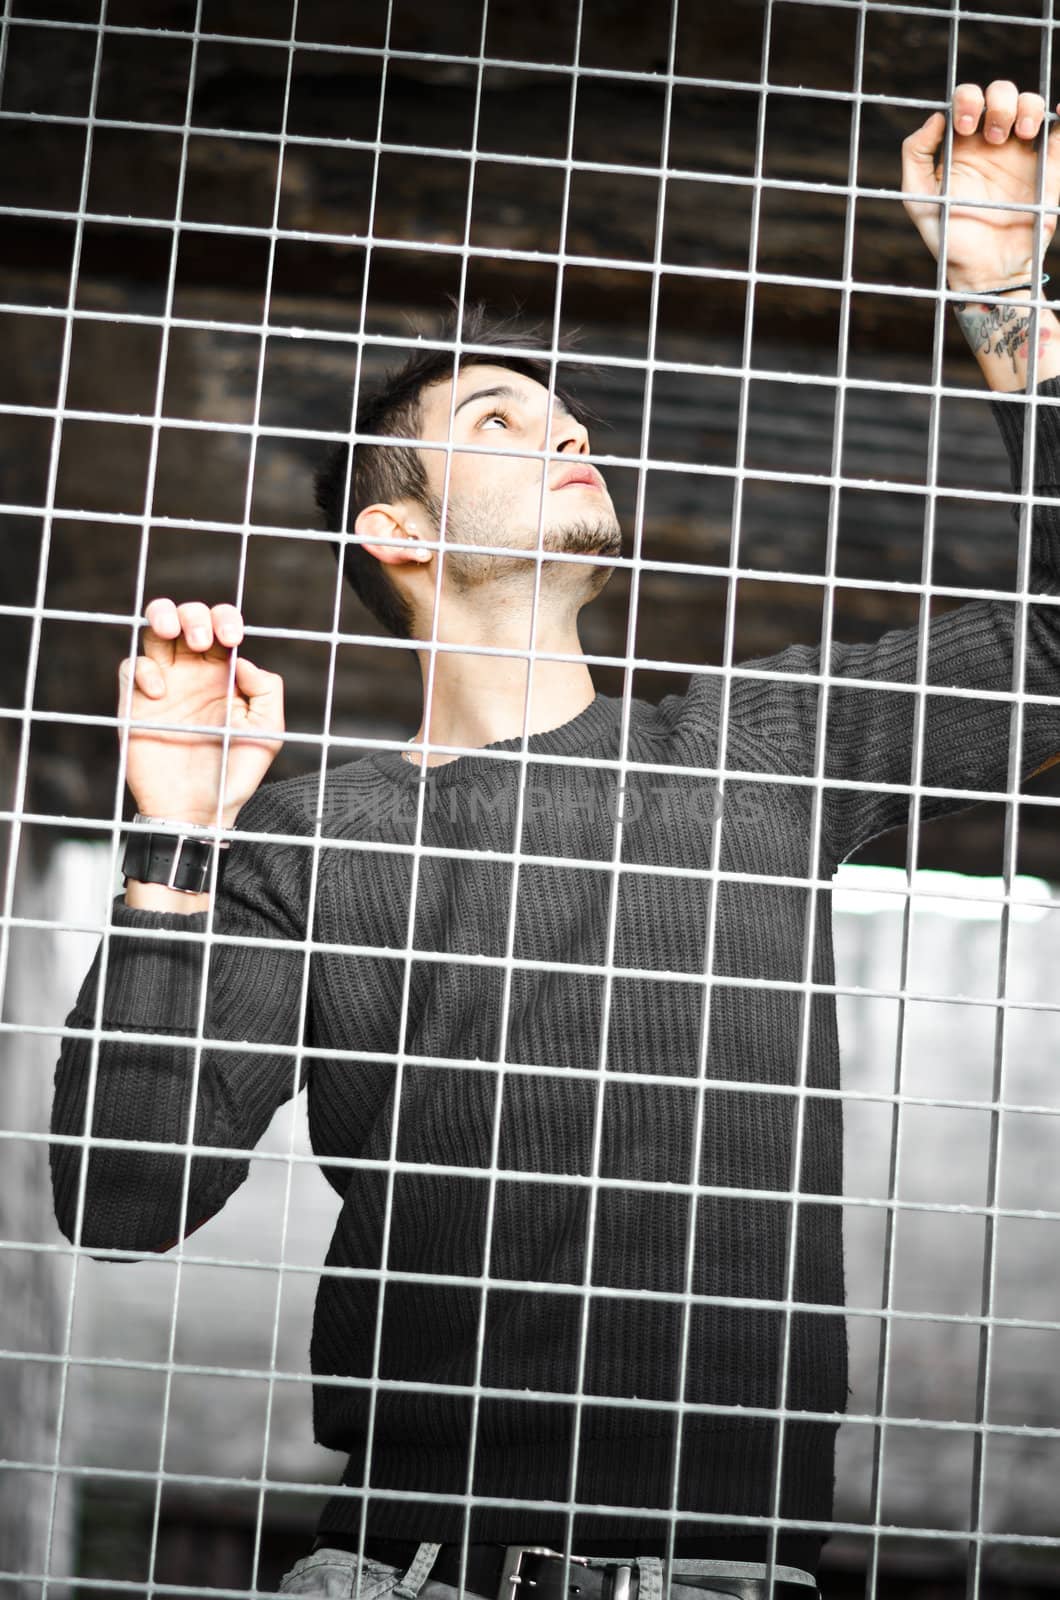 Handsome young man caged behind metal or steel net